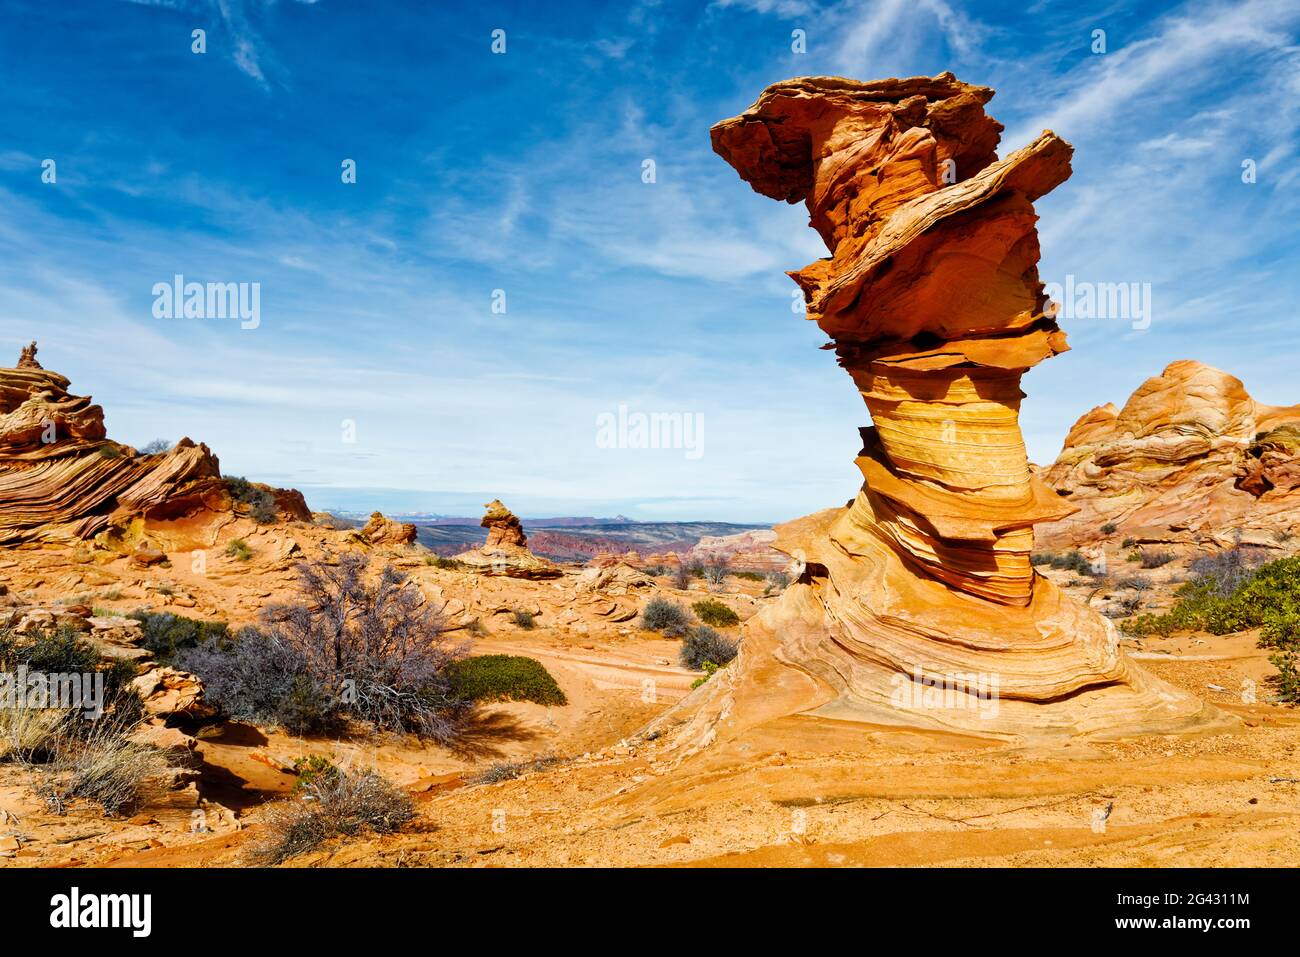 Sandstone rock formation in desert, Coyote Buttes South, Paria Canyon Vermilion Cliffs Wilderness, Arizona, USA Stock Photo